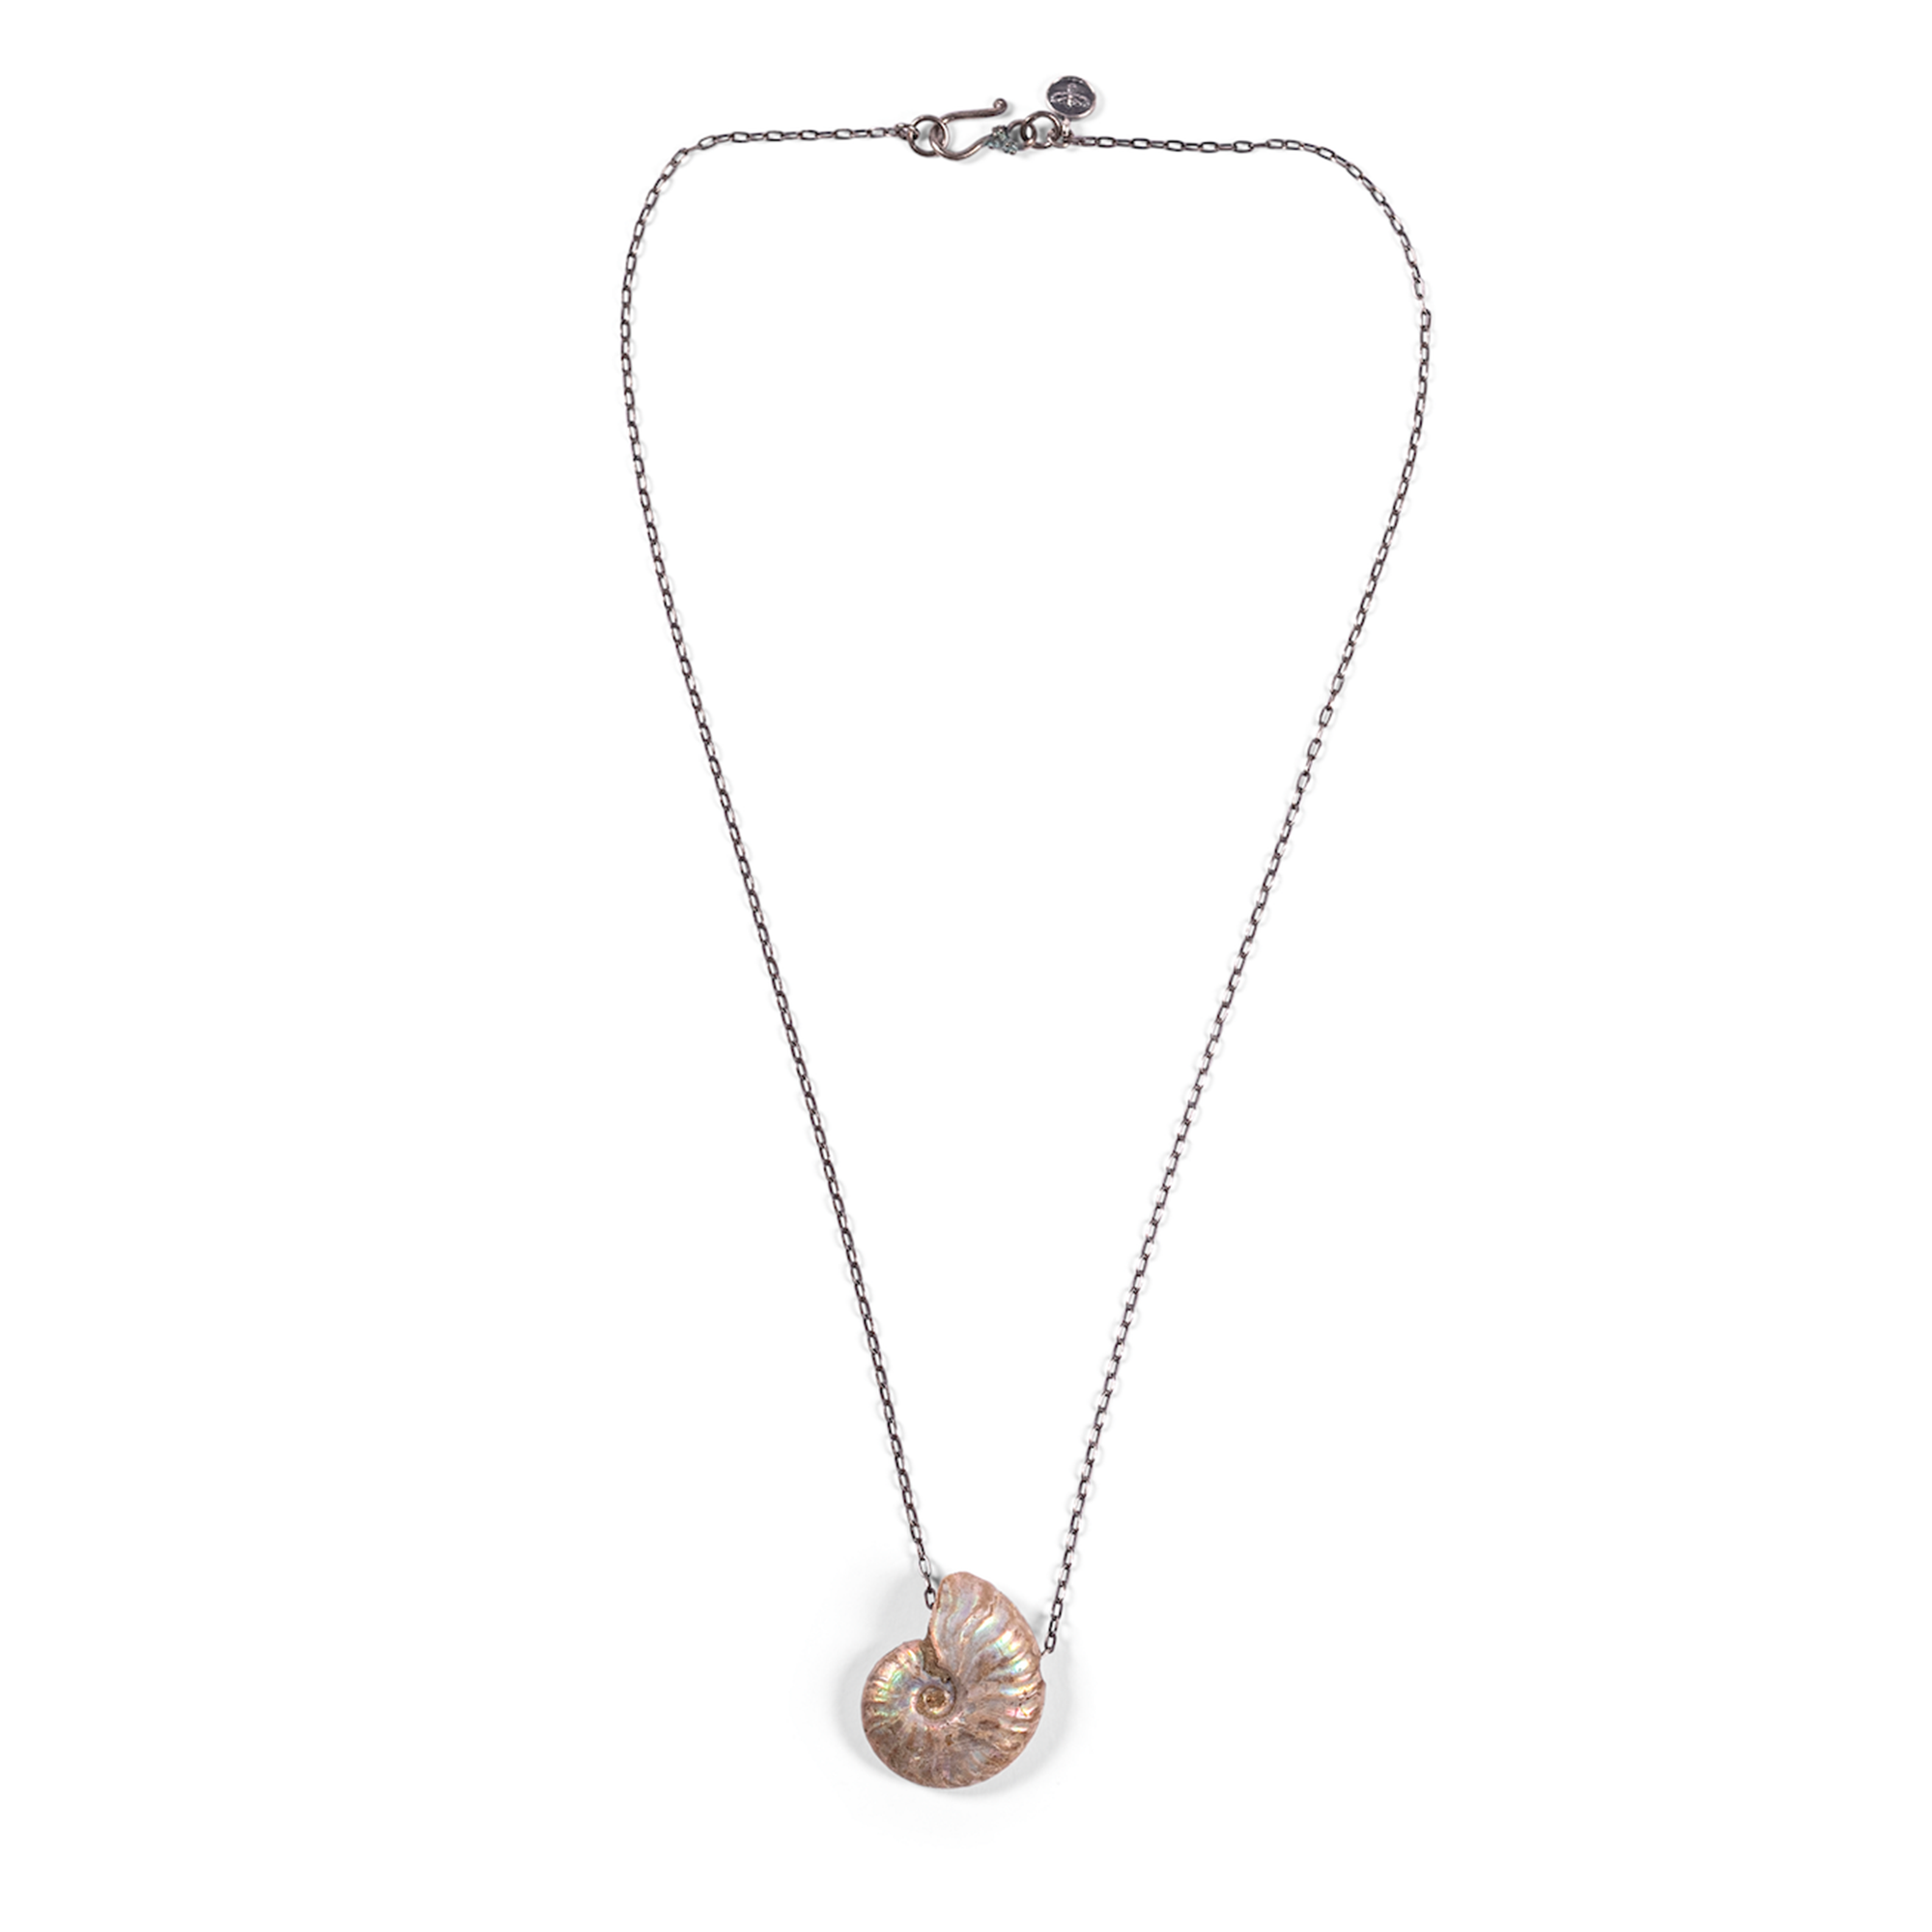 Small Ammonite Fossil Necklace